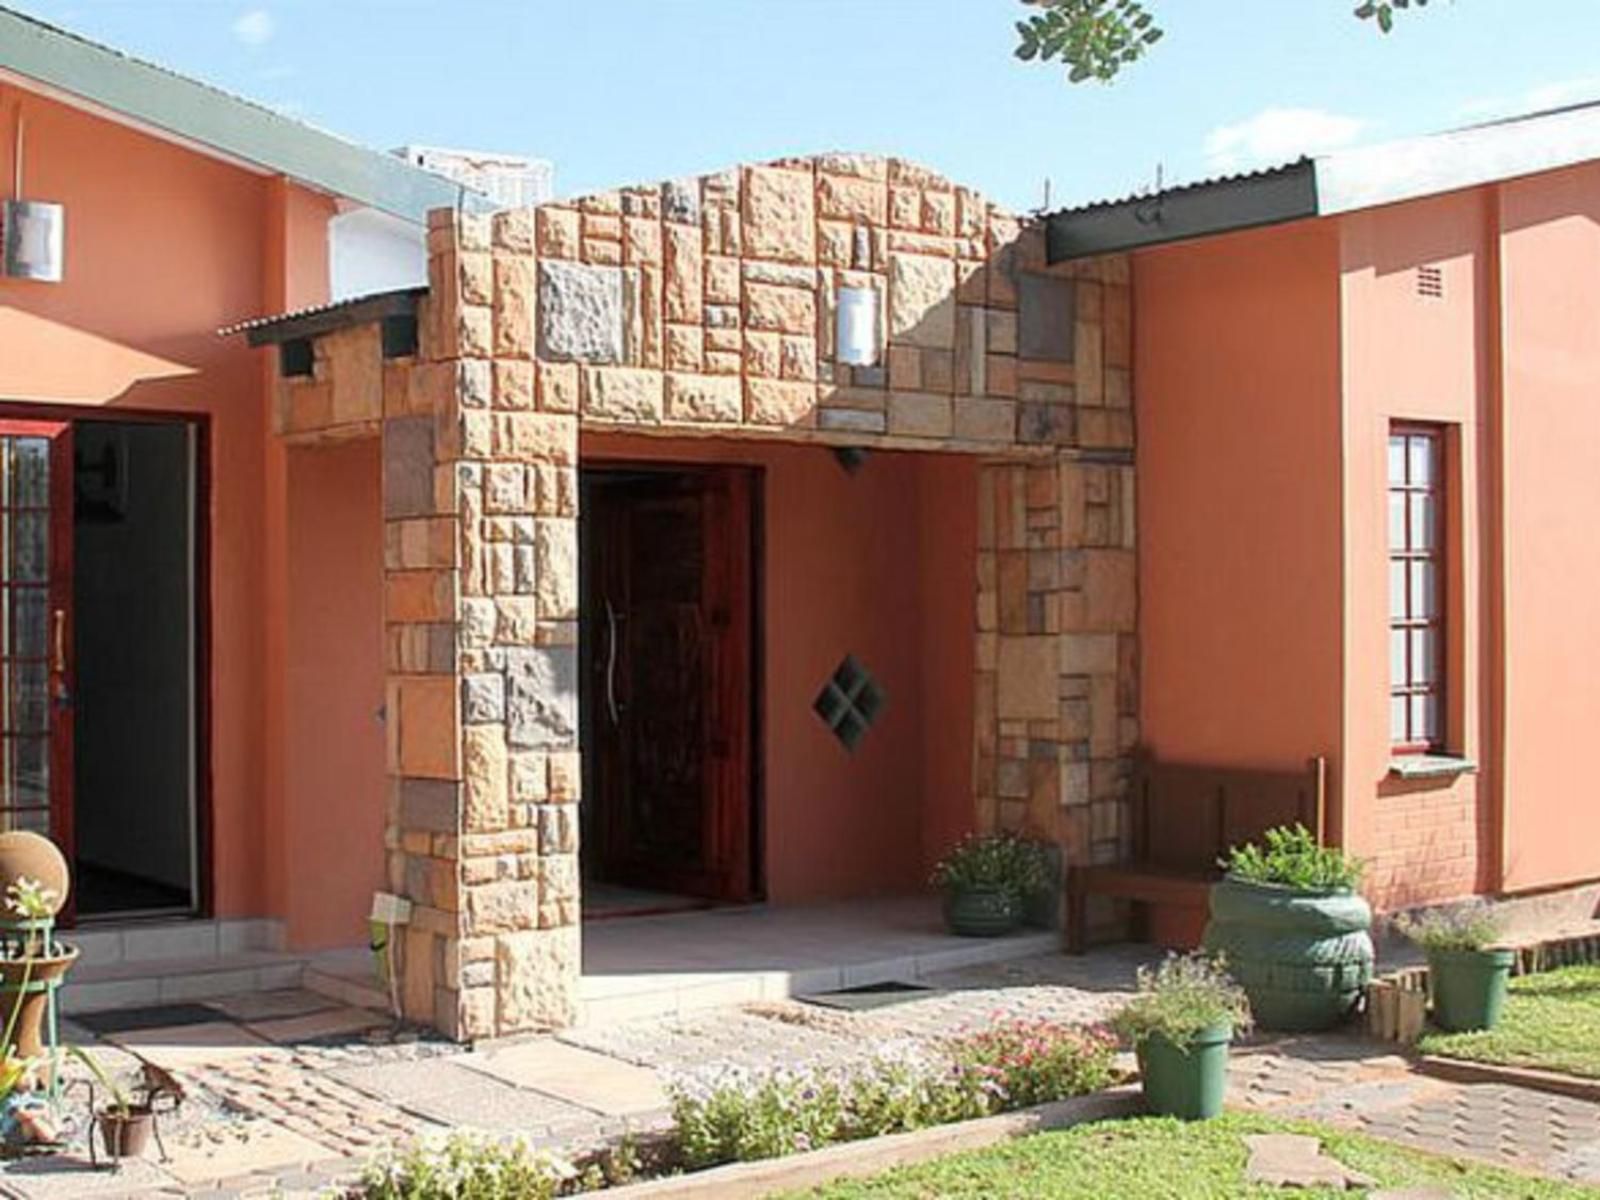 Airport Bed And Breakfast Rand Upington Northern Cape South Africa House, Building, Architecture